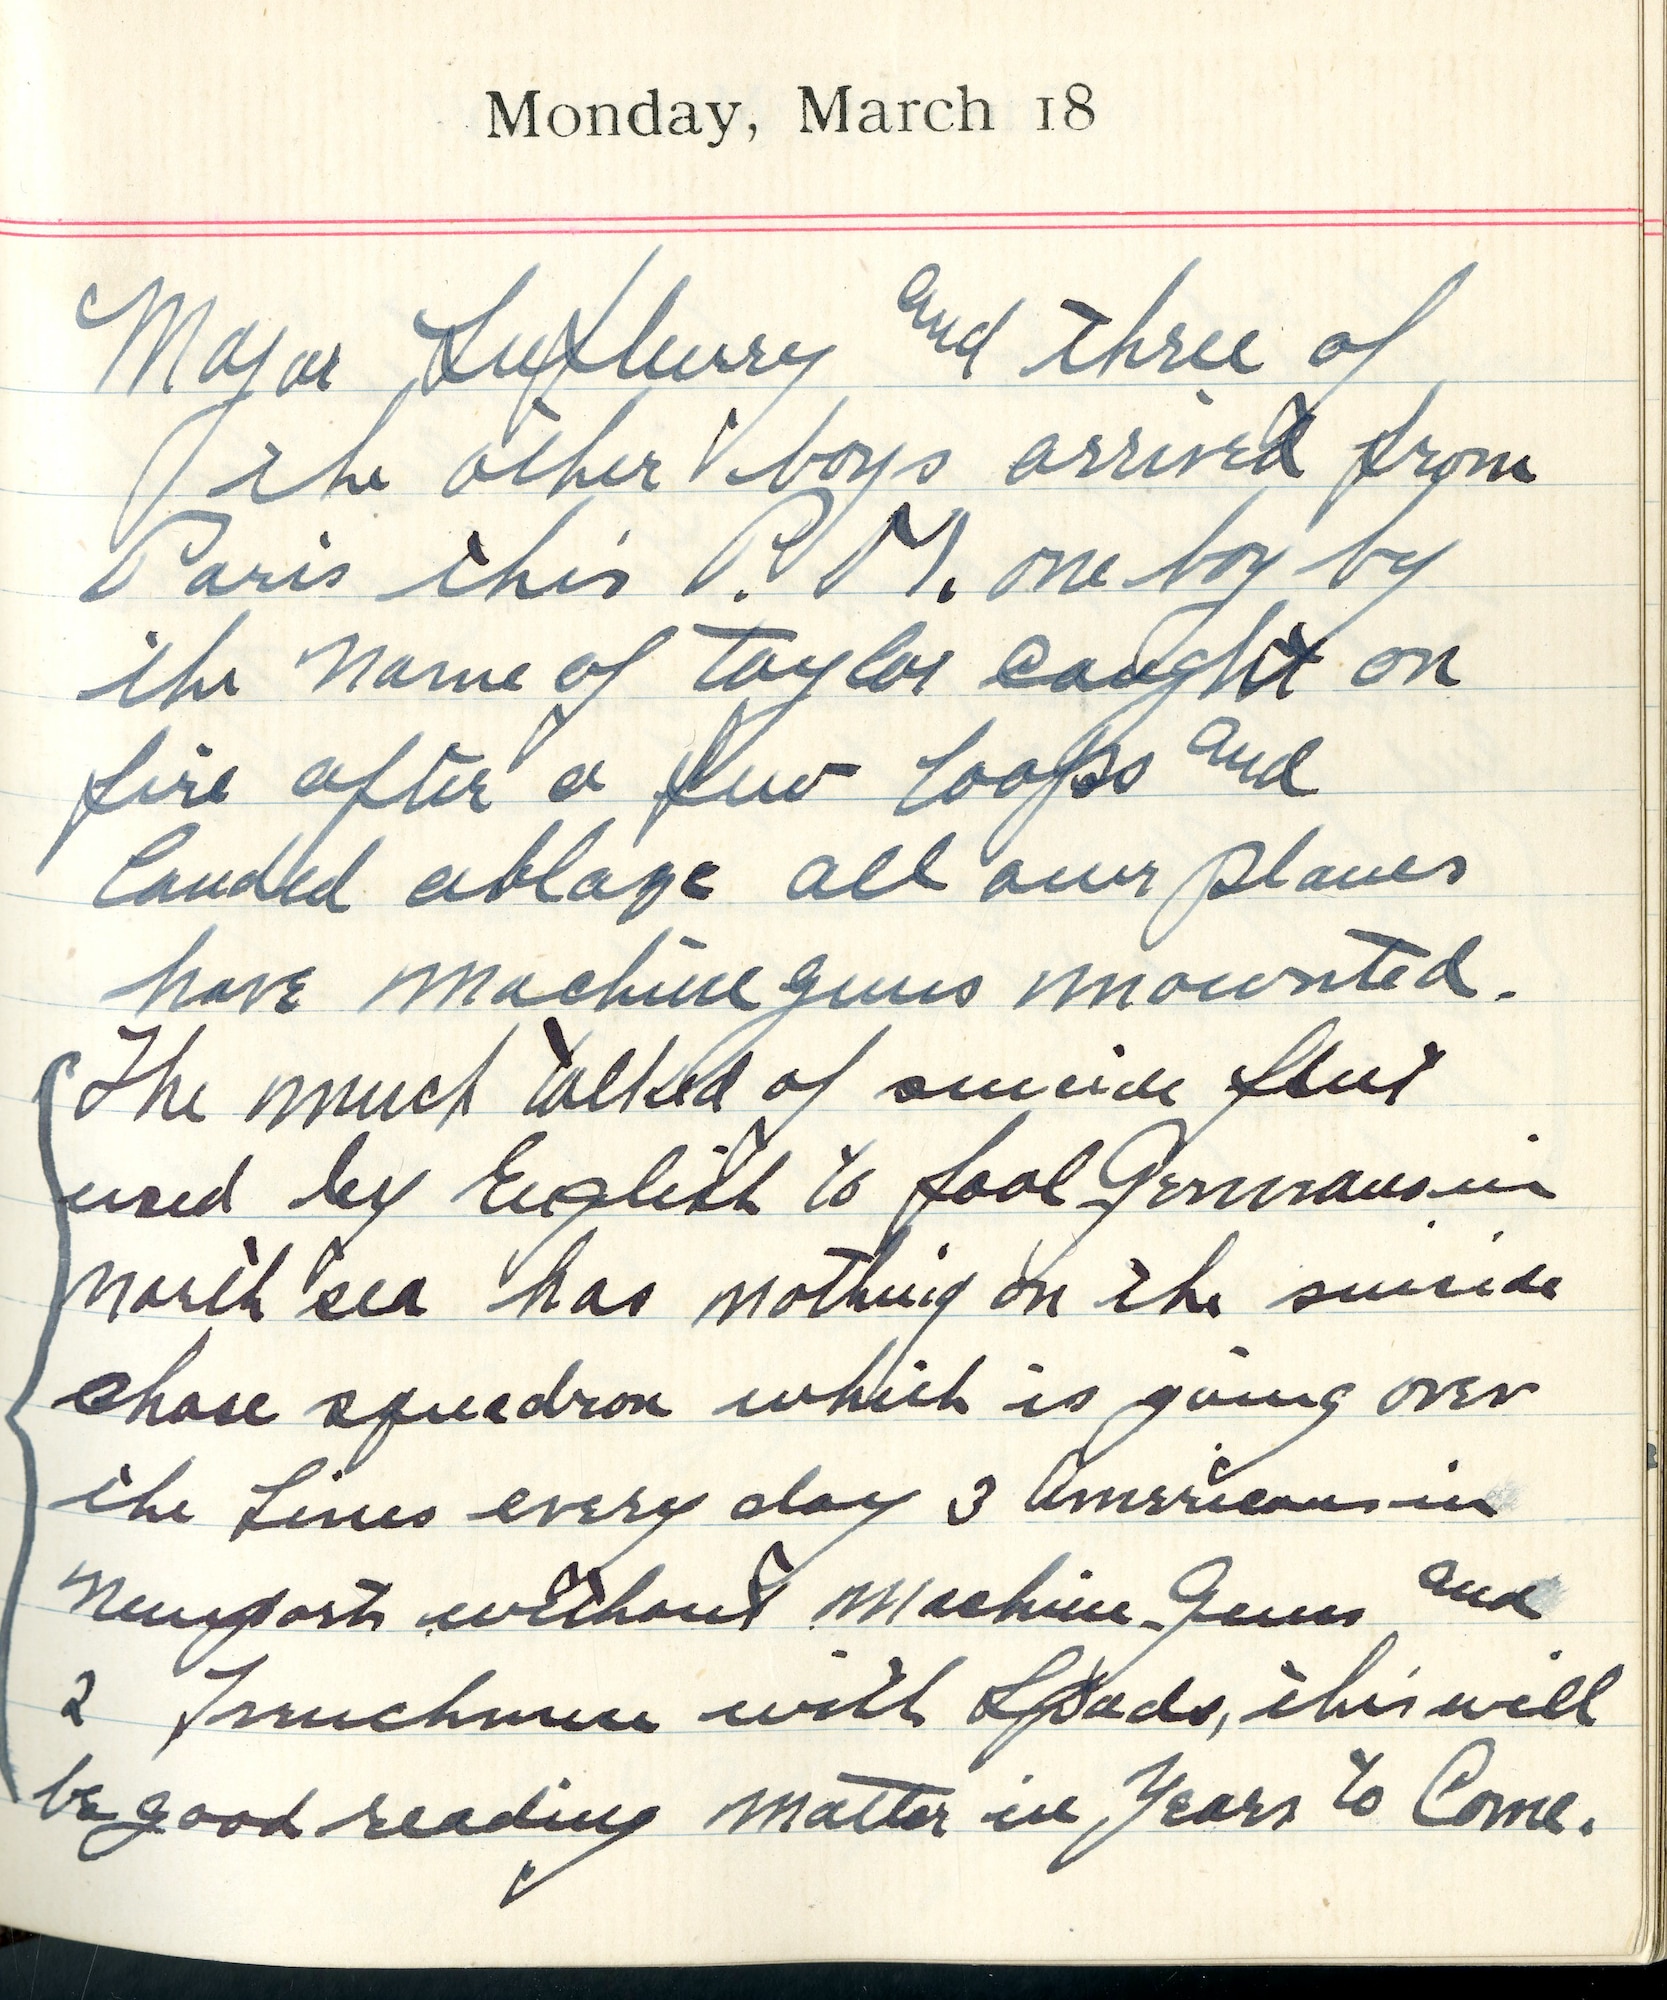 Capt. Edward V. Rickenbacker's 1918 wartime diary entry. (03/18/1918).

Major Lufbery and three of the other boys arrived from Paris this P.M.  One boy by the name of [Lt. Thorne C.] Taylor caught on fire after a few loops and landed ablaze.  All our planes have machine guns mounted.  The much talked of suicide fleet used by English to fool Germans in North Sea has nothing on the suicide chase squadron which is going over the lines every day.  3 Americans in Nieuports without machine guns and 2 Frenchmen with SPADs.  This will be good reading matter in years to come.